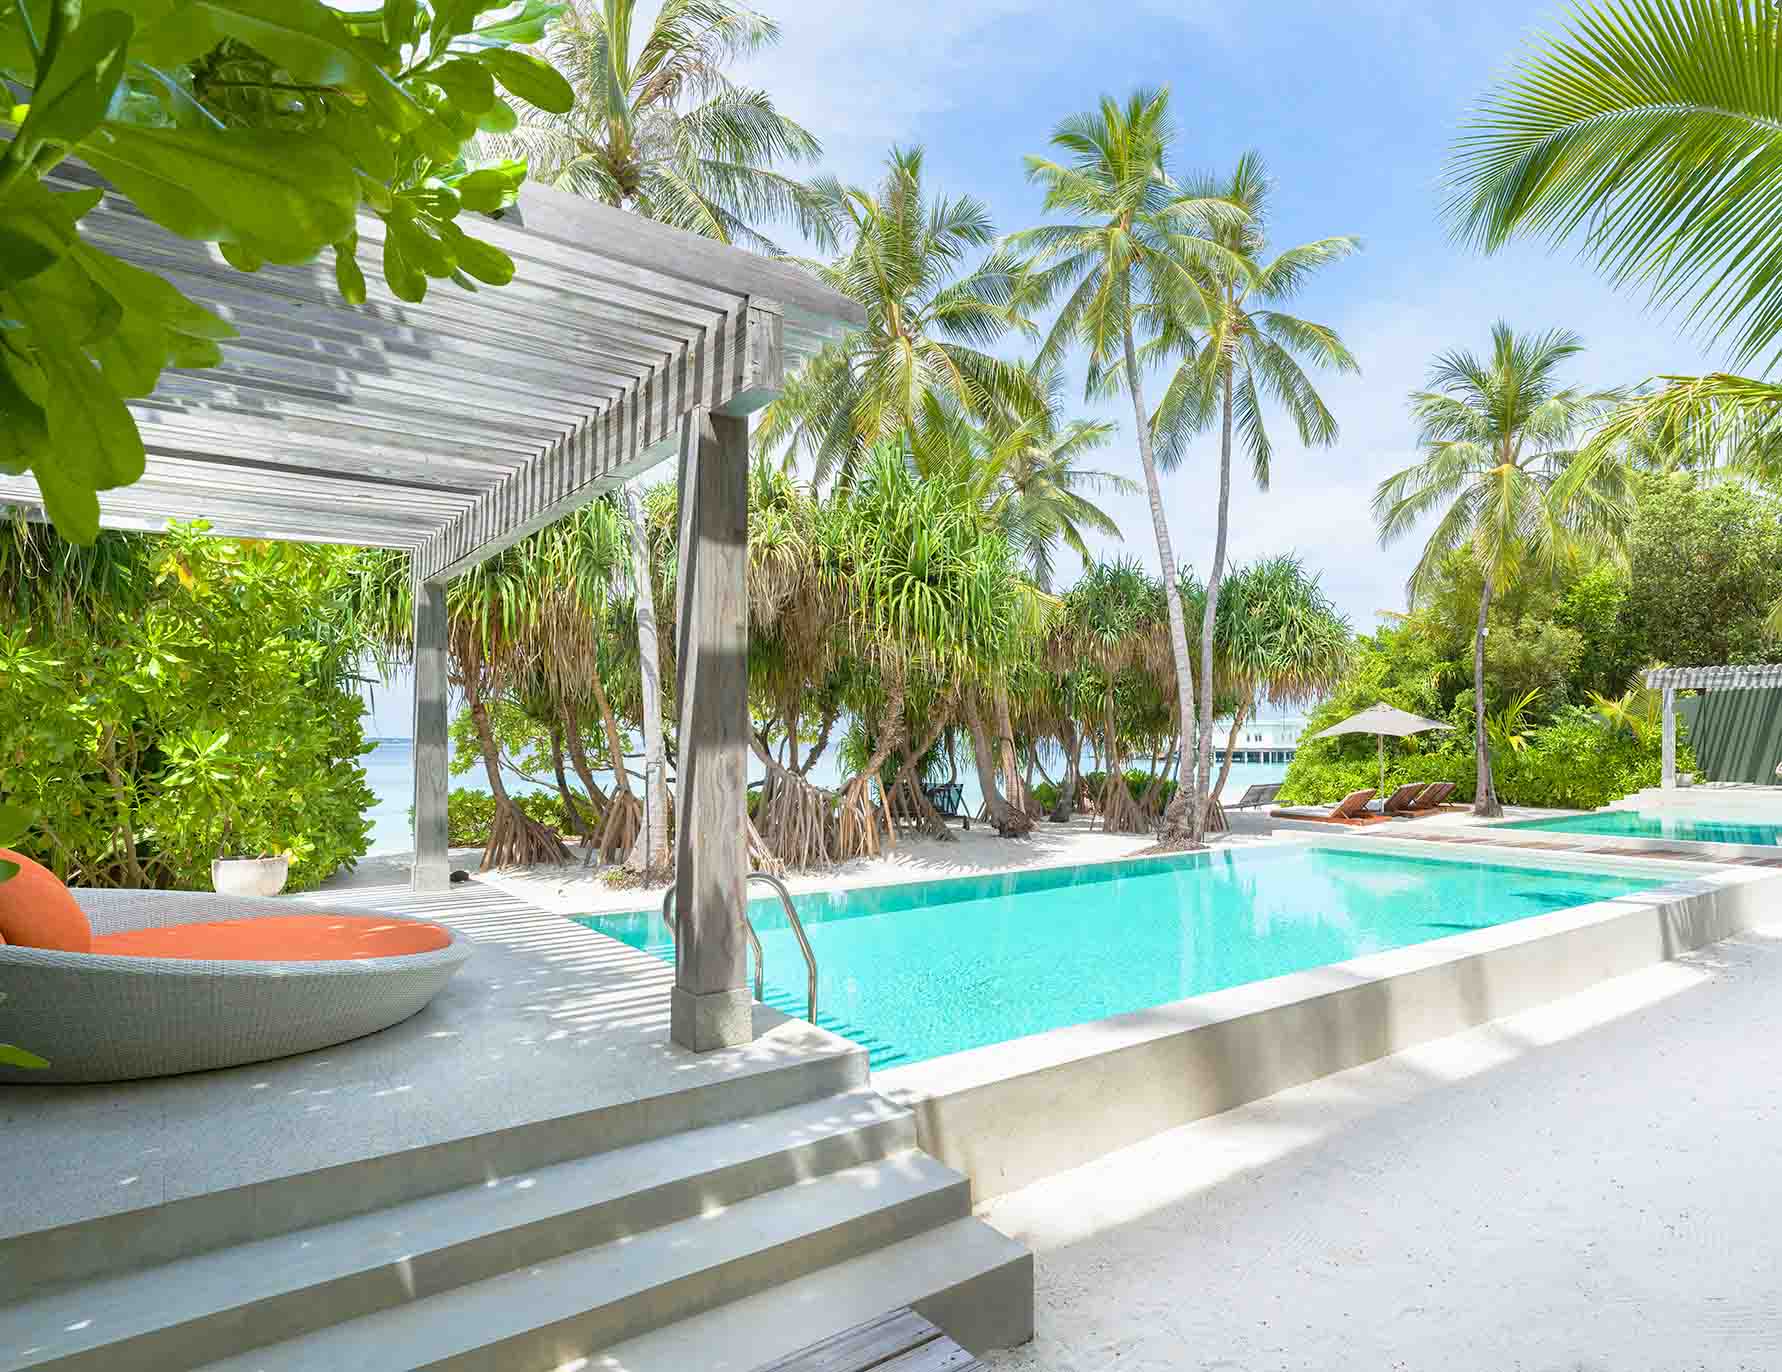 The days beds and 2 private freshwater pools with private beach access at our Great Beach Residence Maldives.